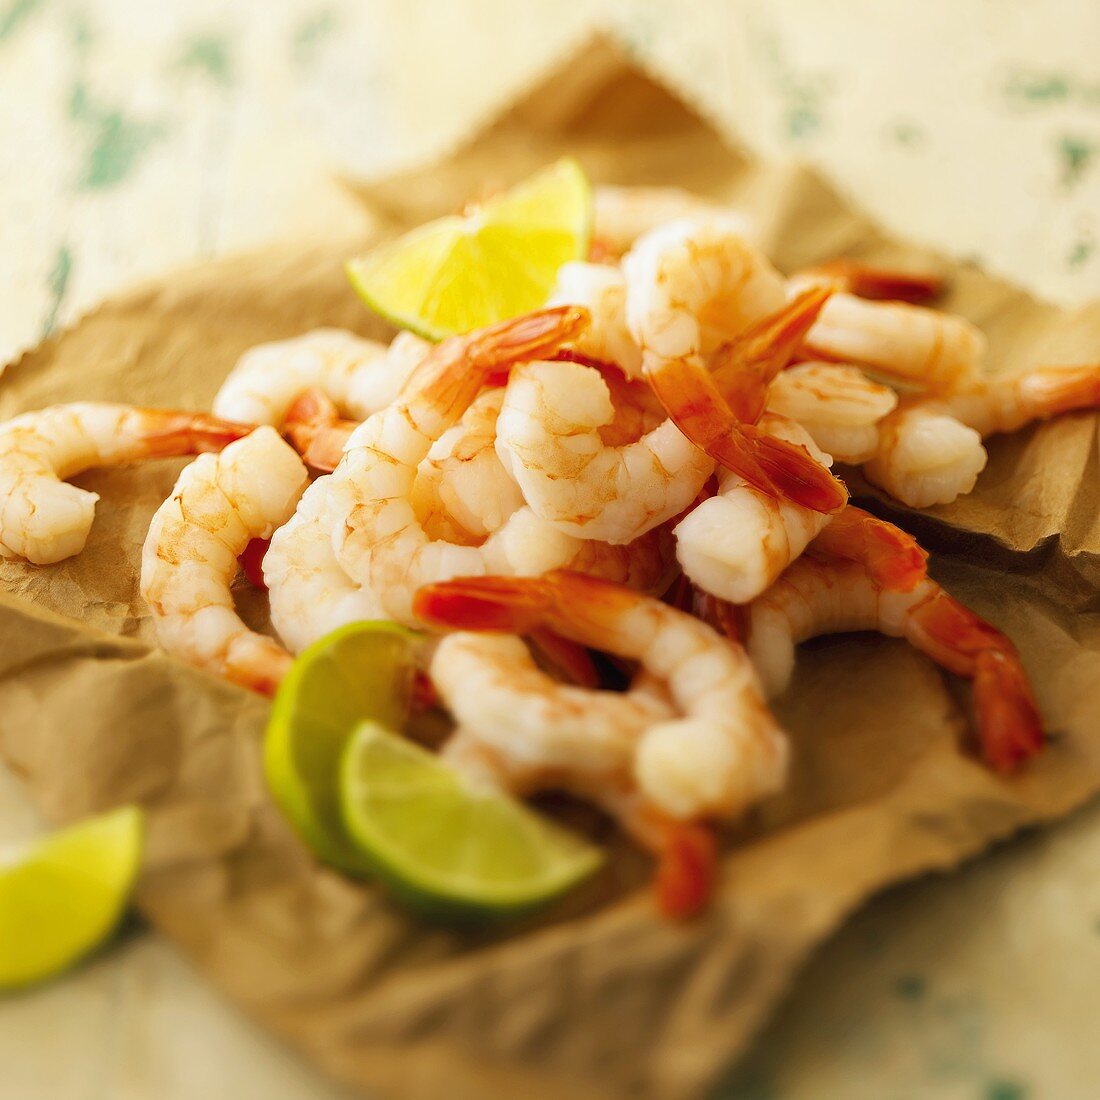 Cooked Shrimp on Paper with Limes